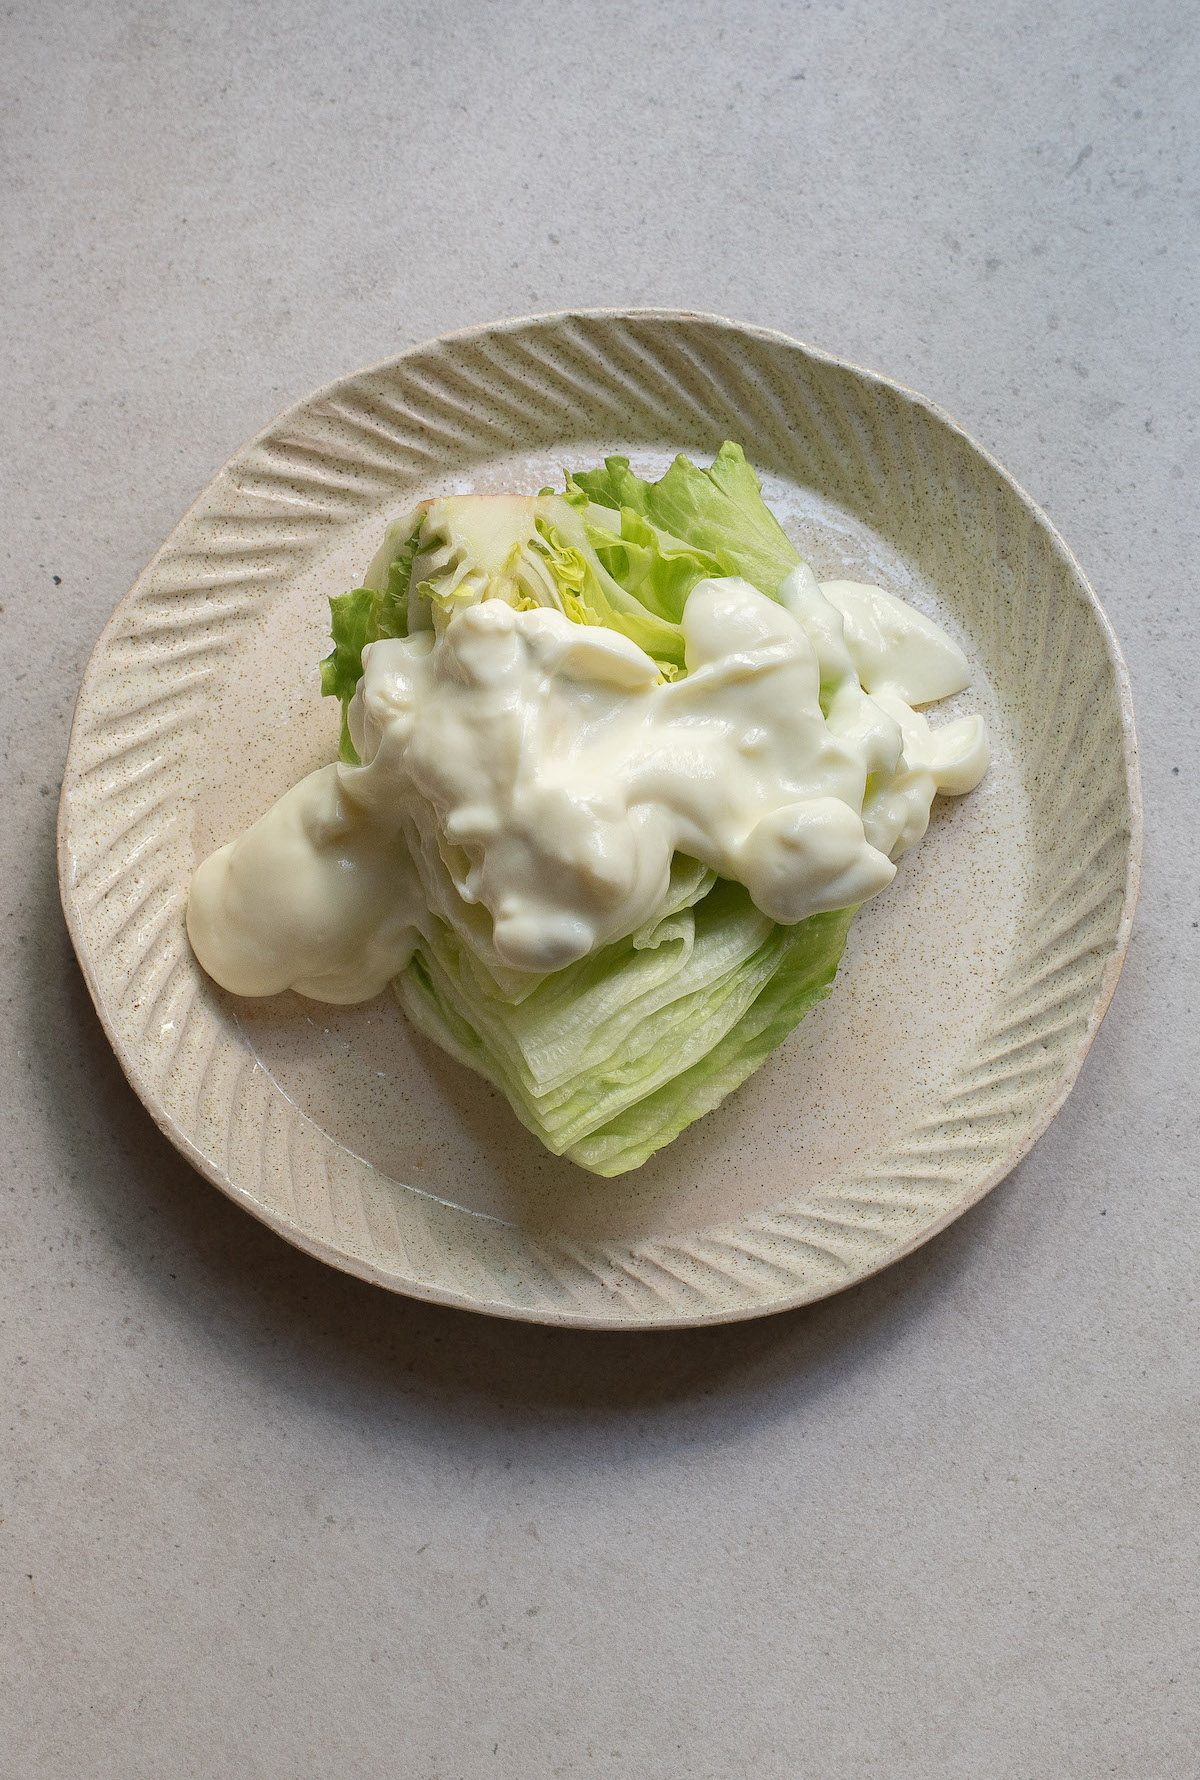 one wedge of iceberg topped with blue cheese dressing